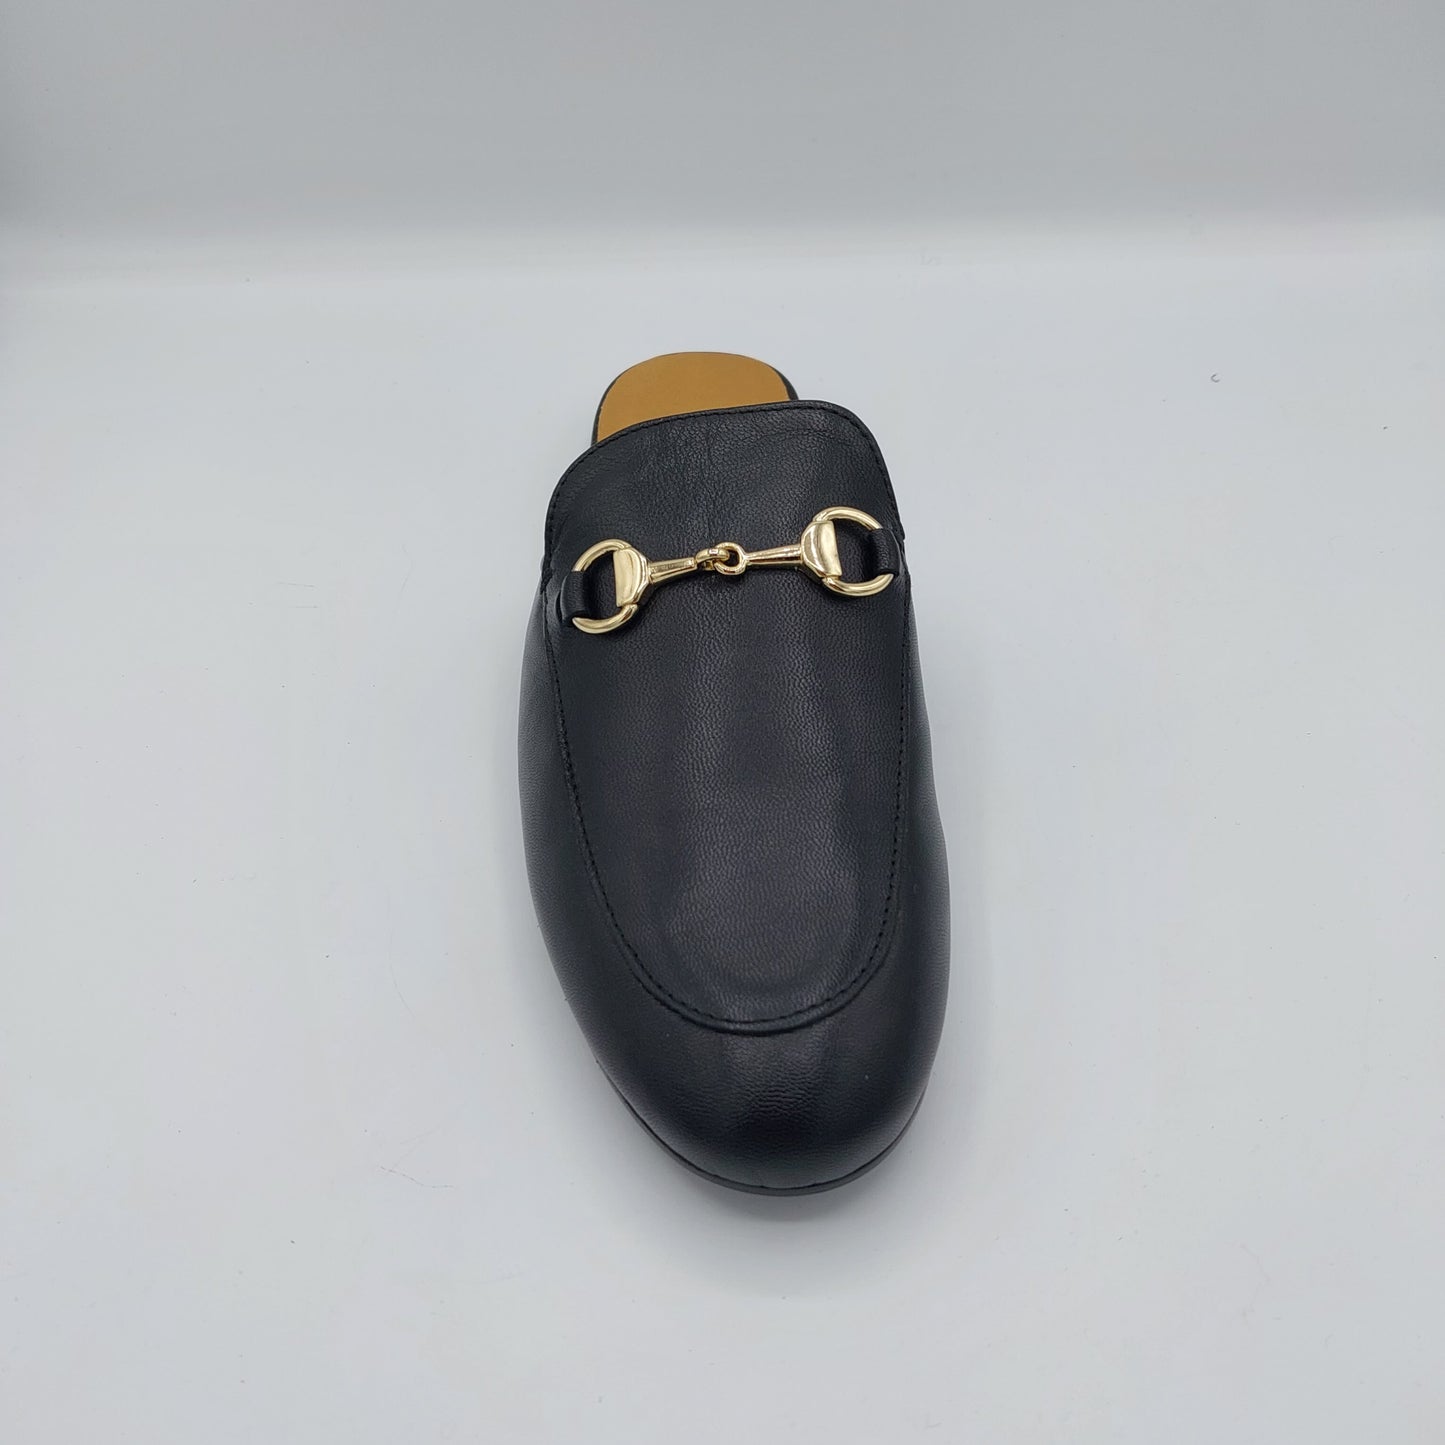 Sabo' Les Tulipes black leather with gold clamp